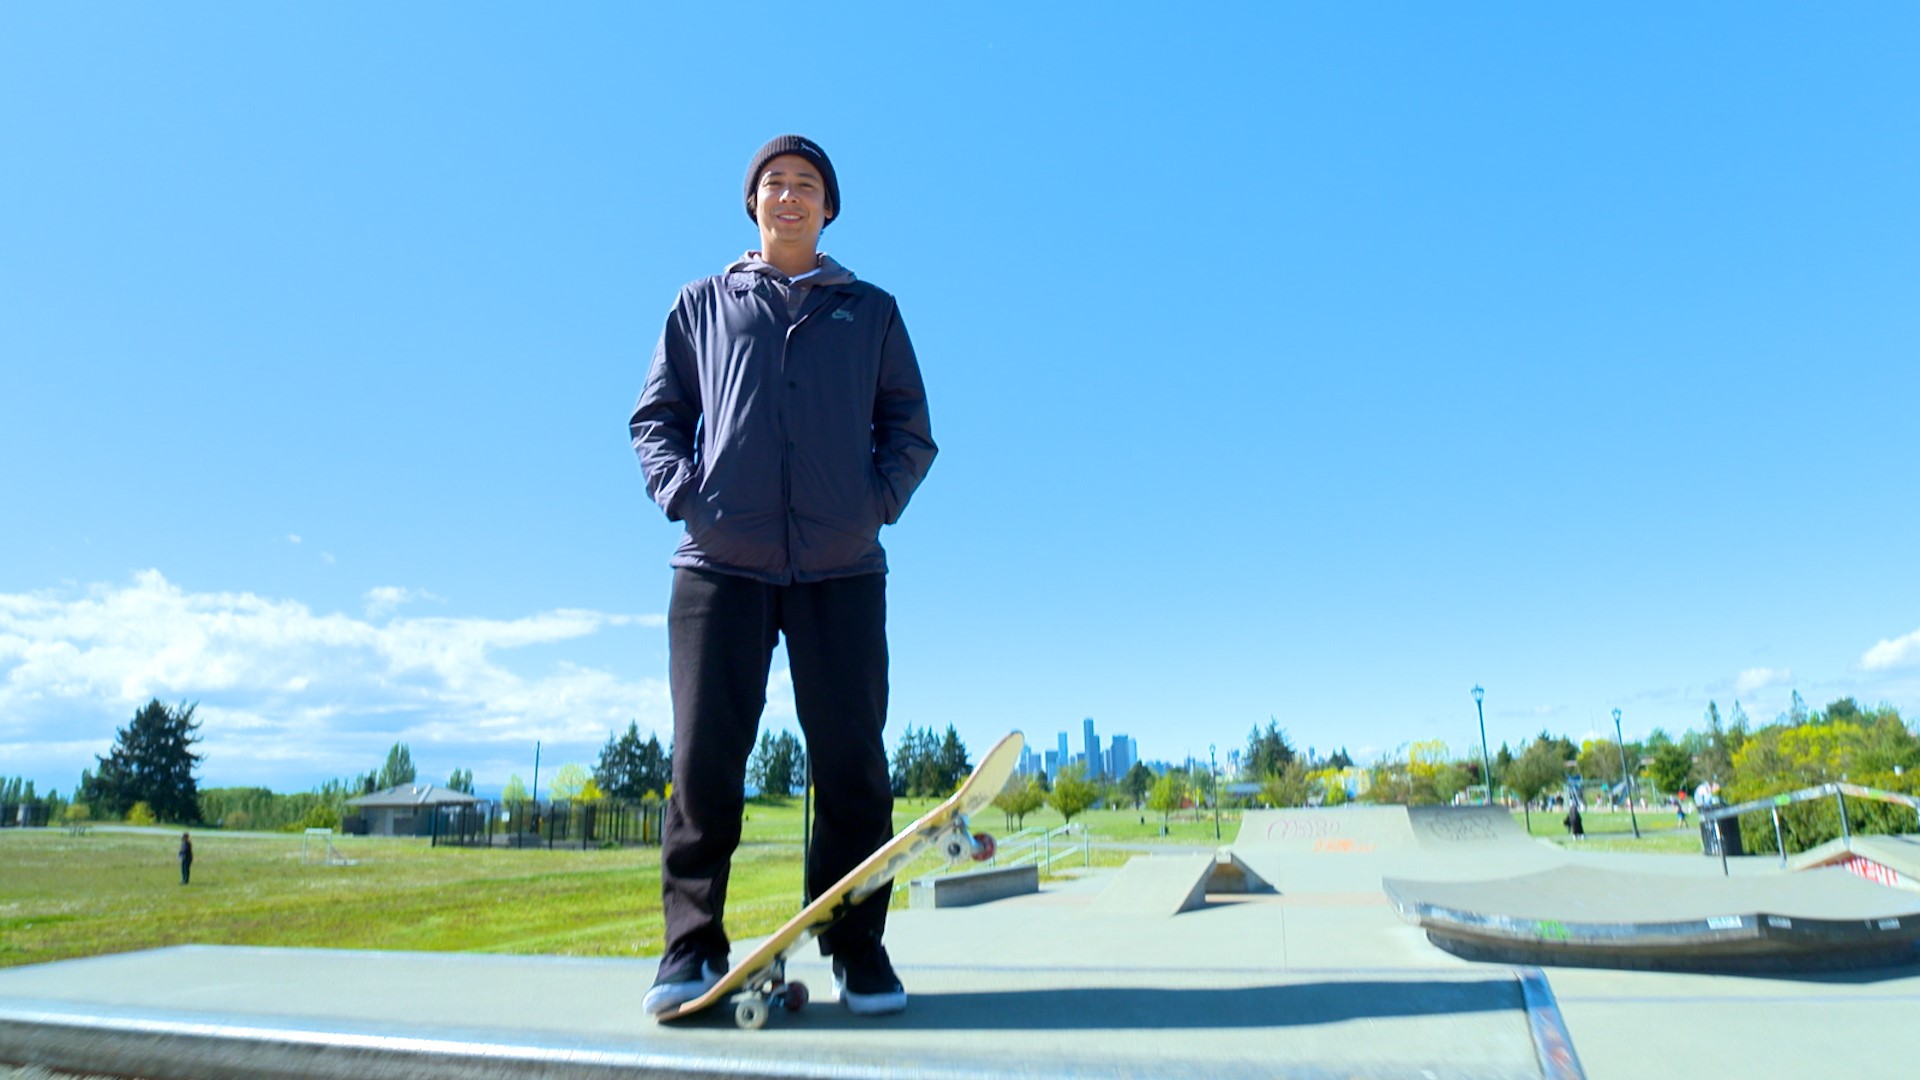 The SLS premier skateboarding competition is coming back to the Pacific Northwest! #k5evening